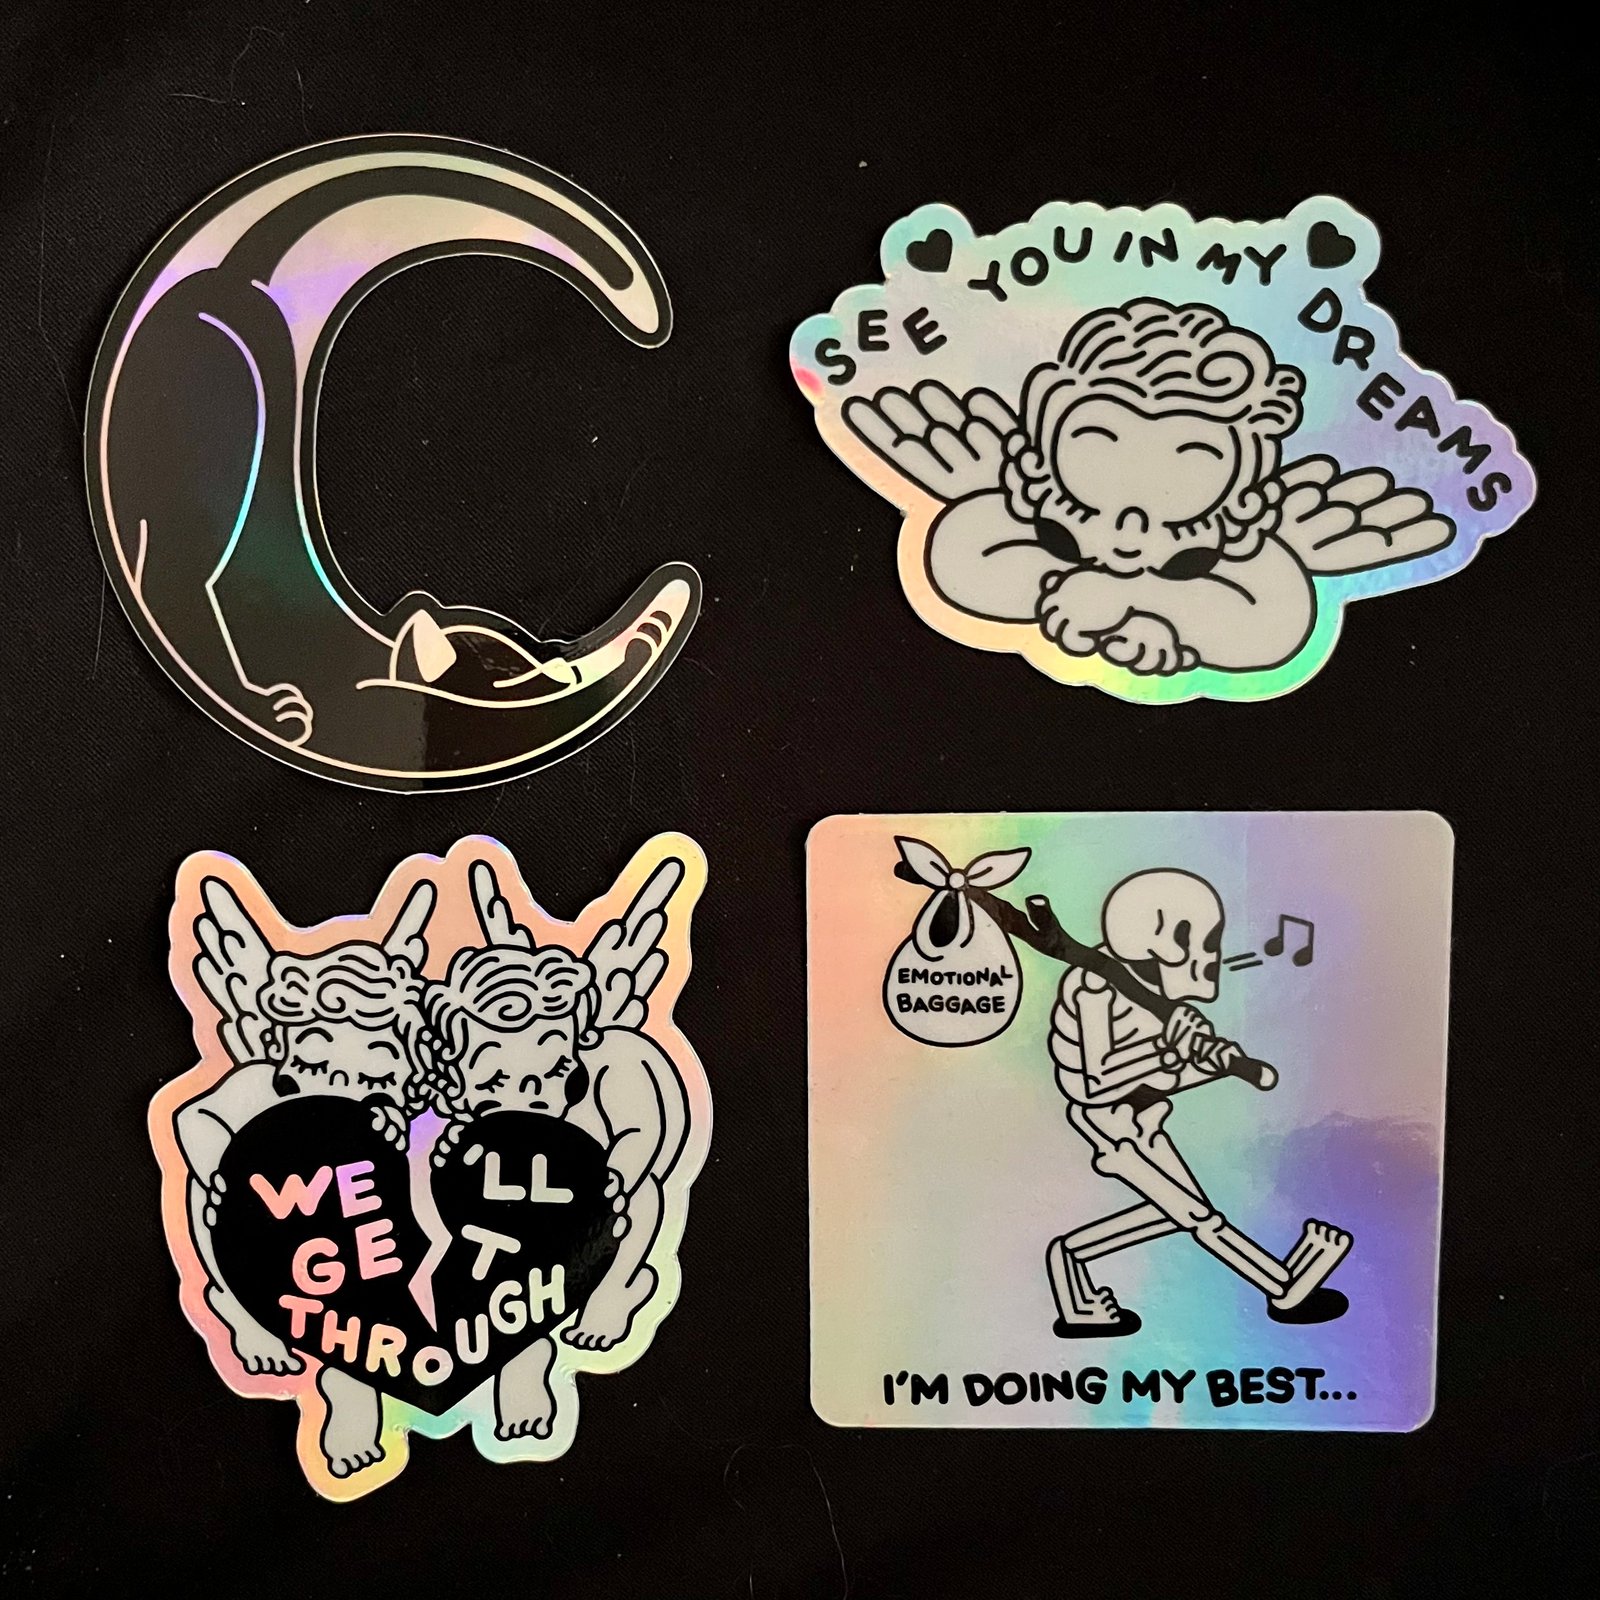 Limited holographic sticker set / bad vibes by matt darling